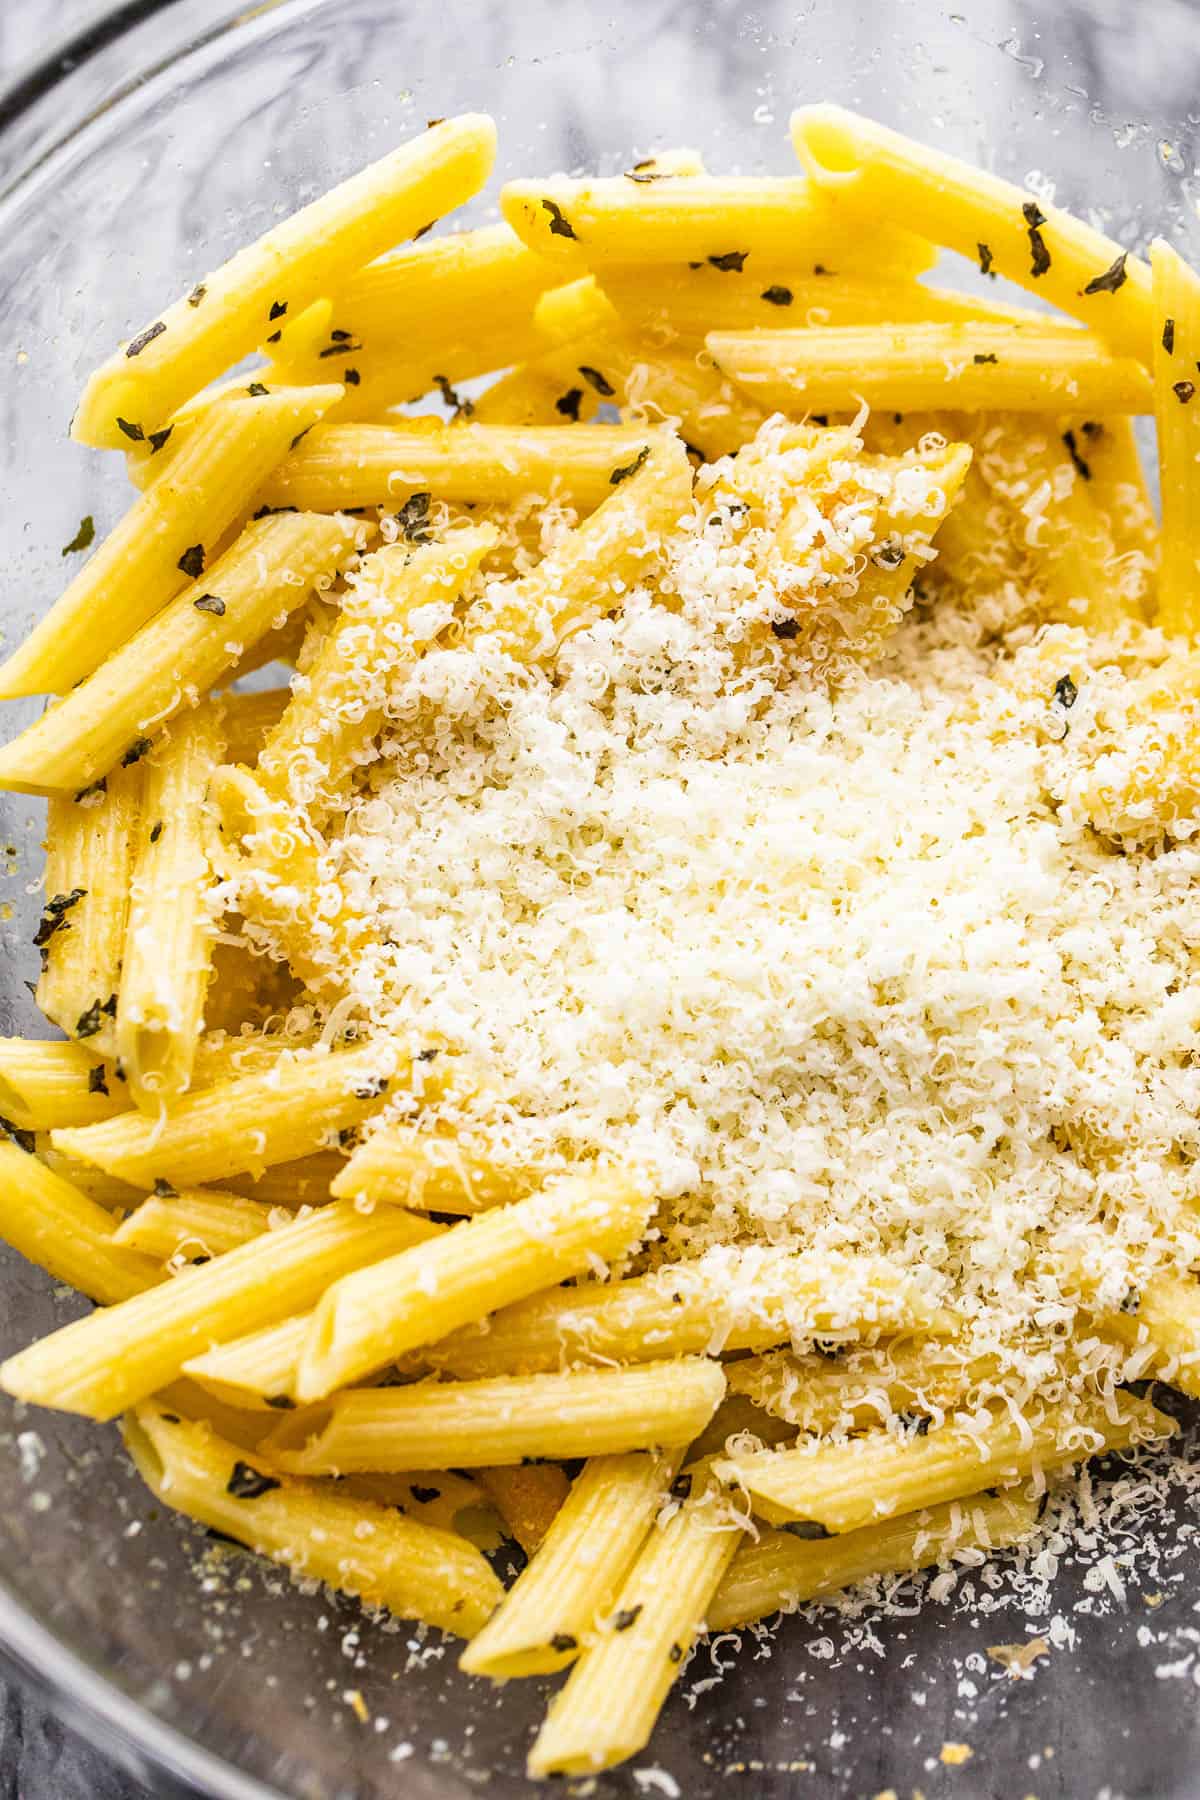 bowl with boiled pasta and a mount of parmesan cheese in the middle of it.